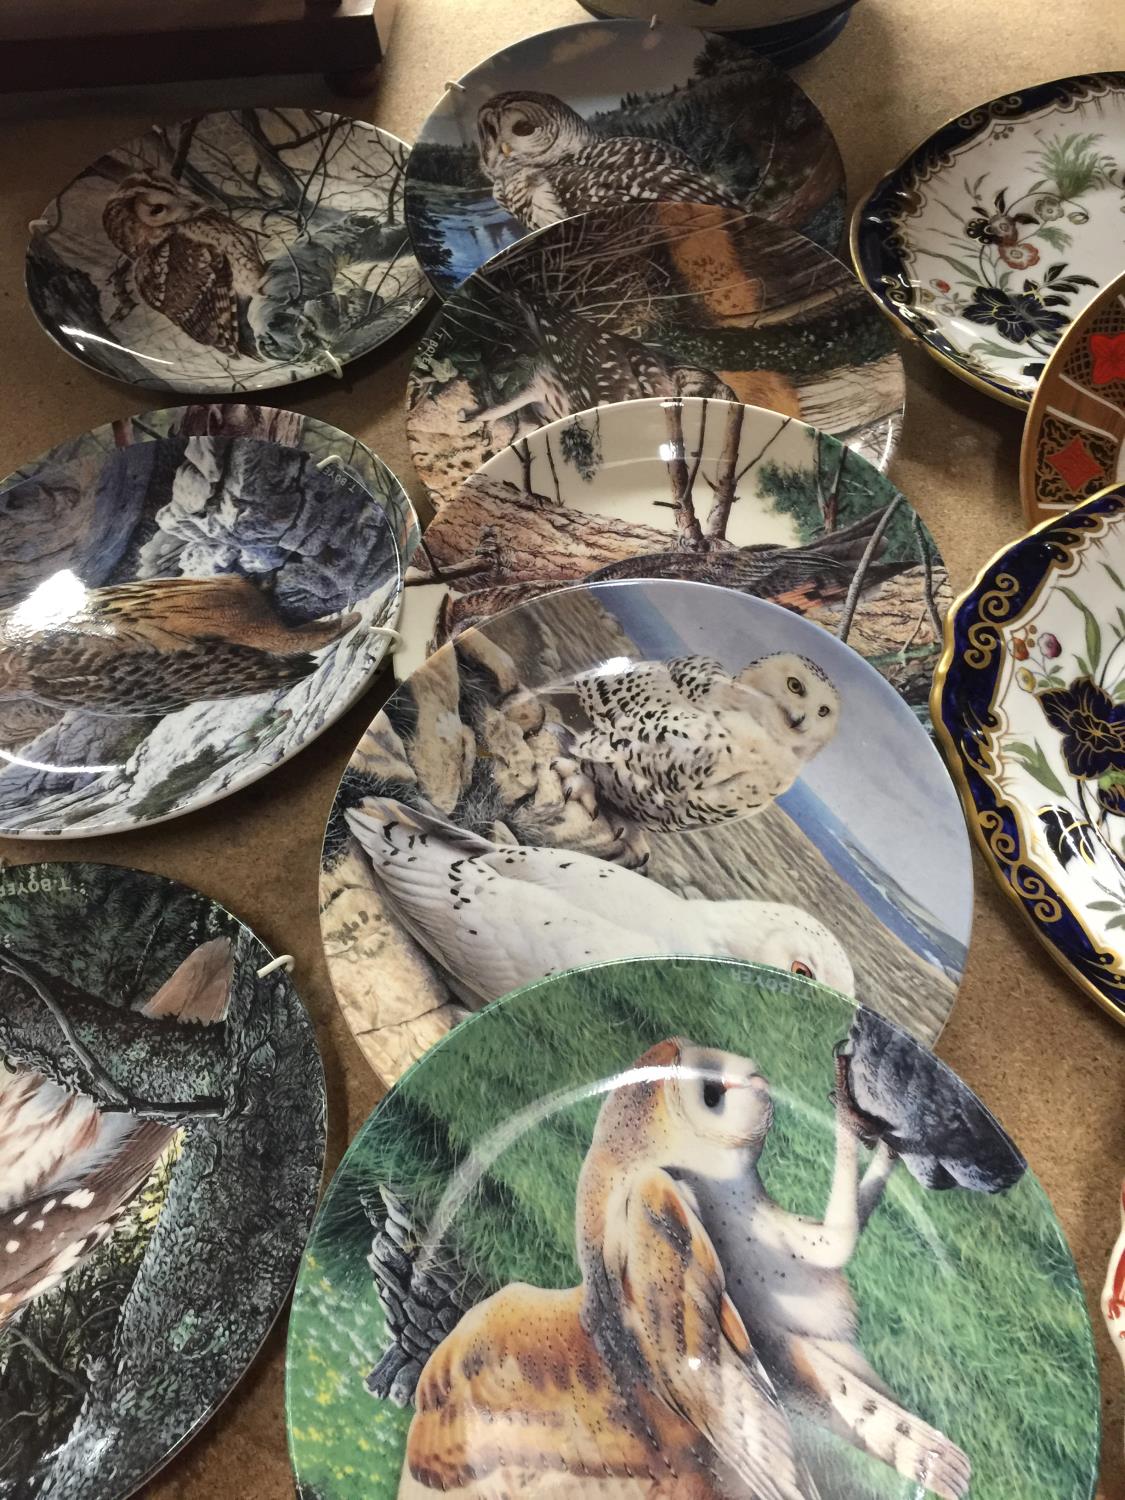 A COLLECTION OF OWL PLATES BY DANBURY MINT NAMED THE "THE MAJESTY OF OWLS" TO INCLUDE LITTLE OWL, - Image 2 of 4